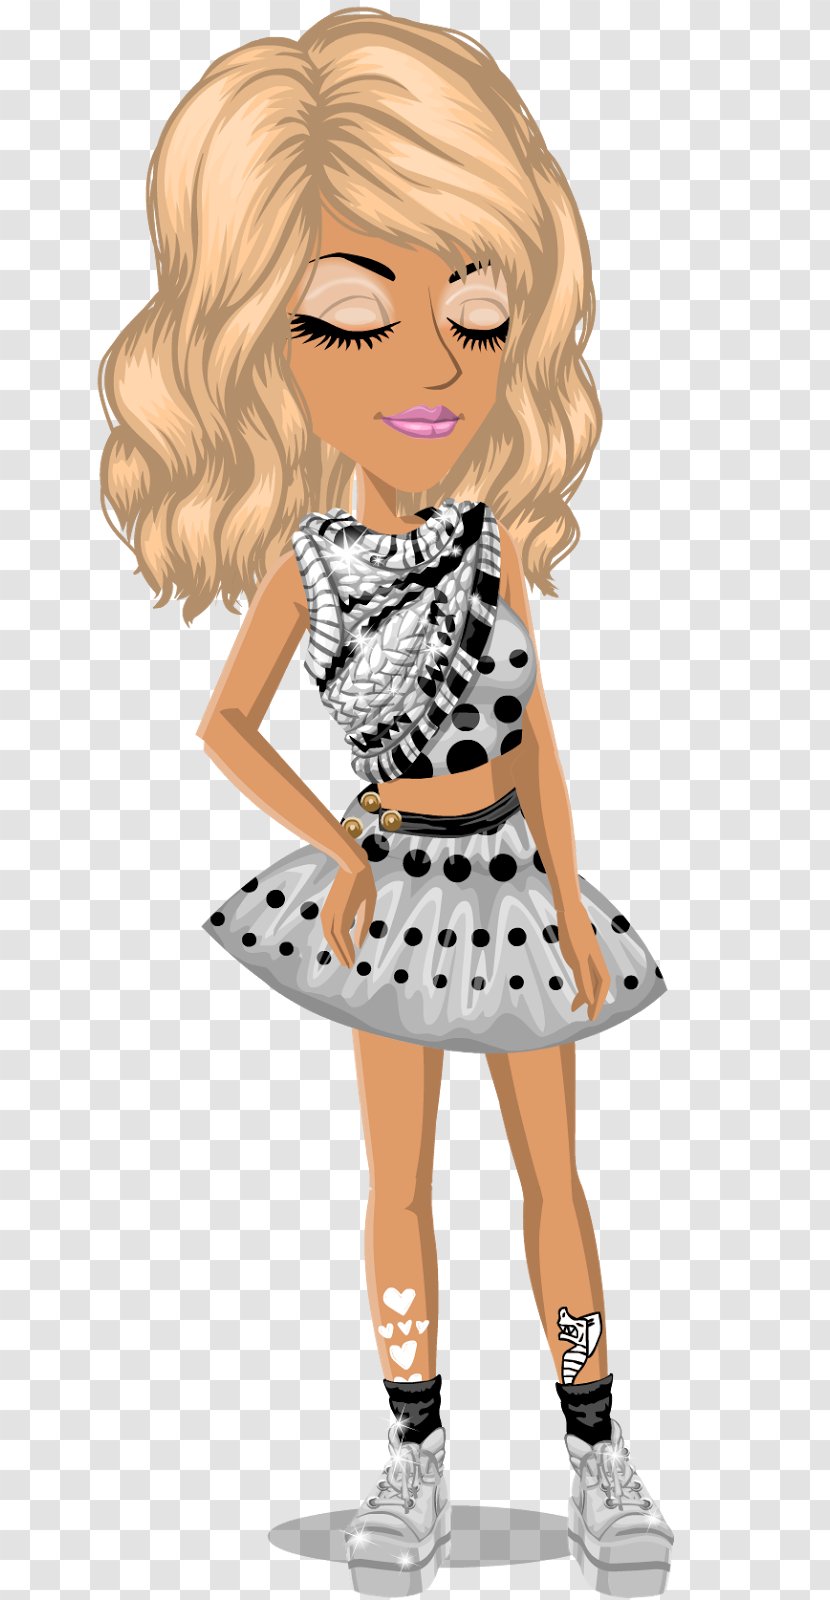 MovieStarPlanet Eye Face Android - Watercolor - Closed Eyes Transparent PNG